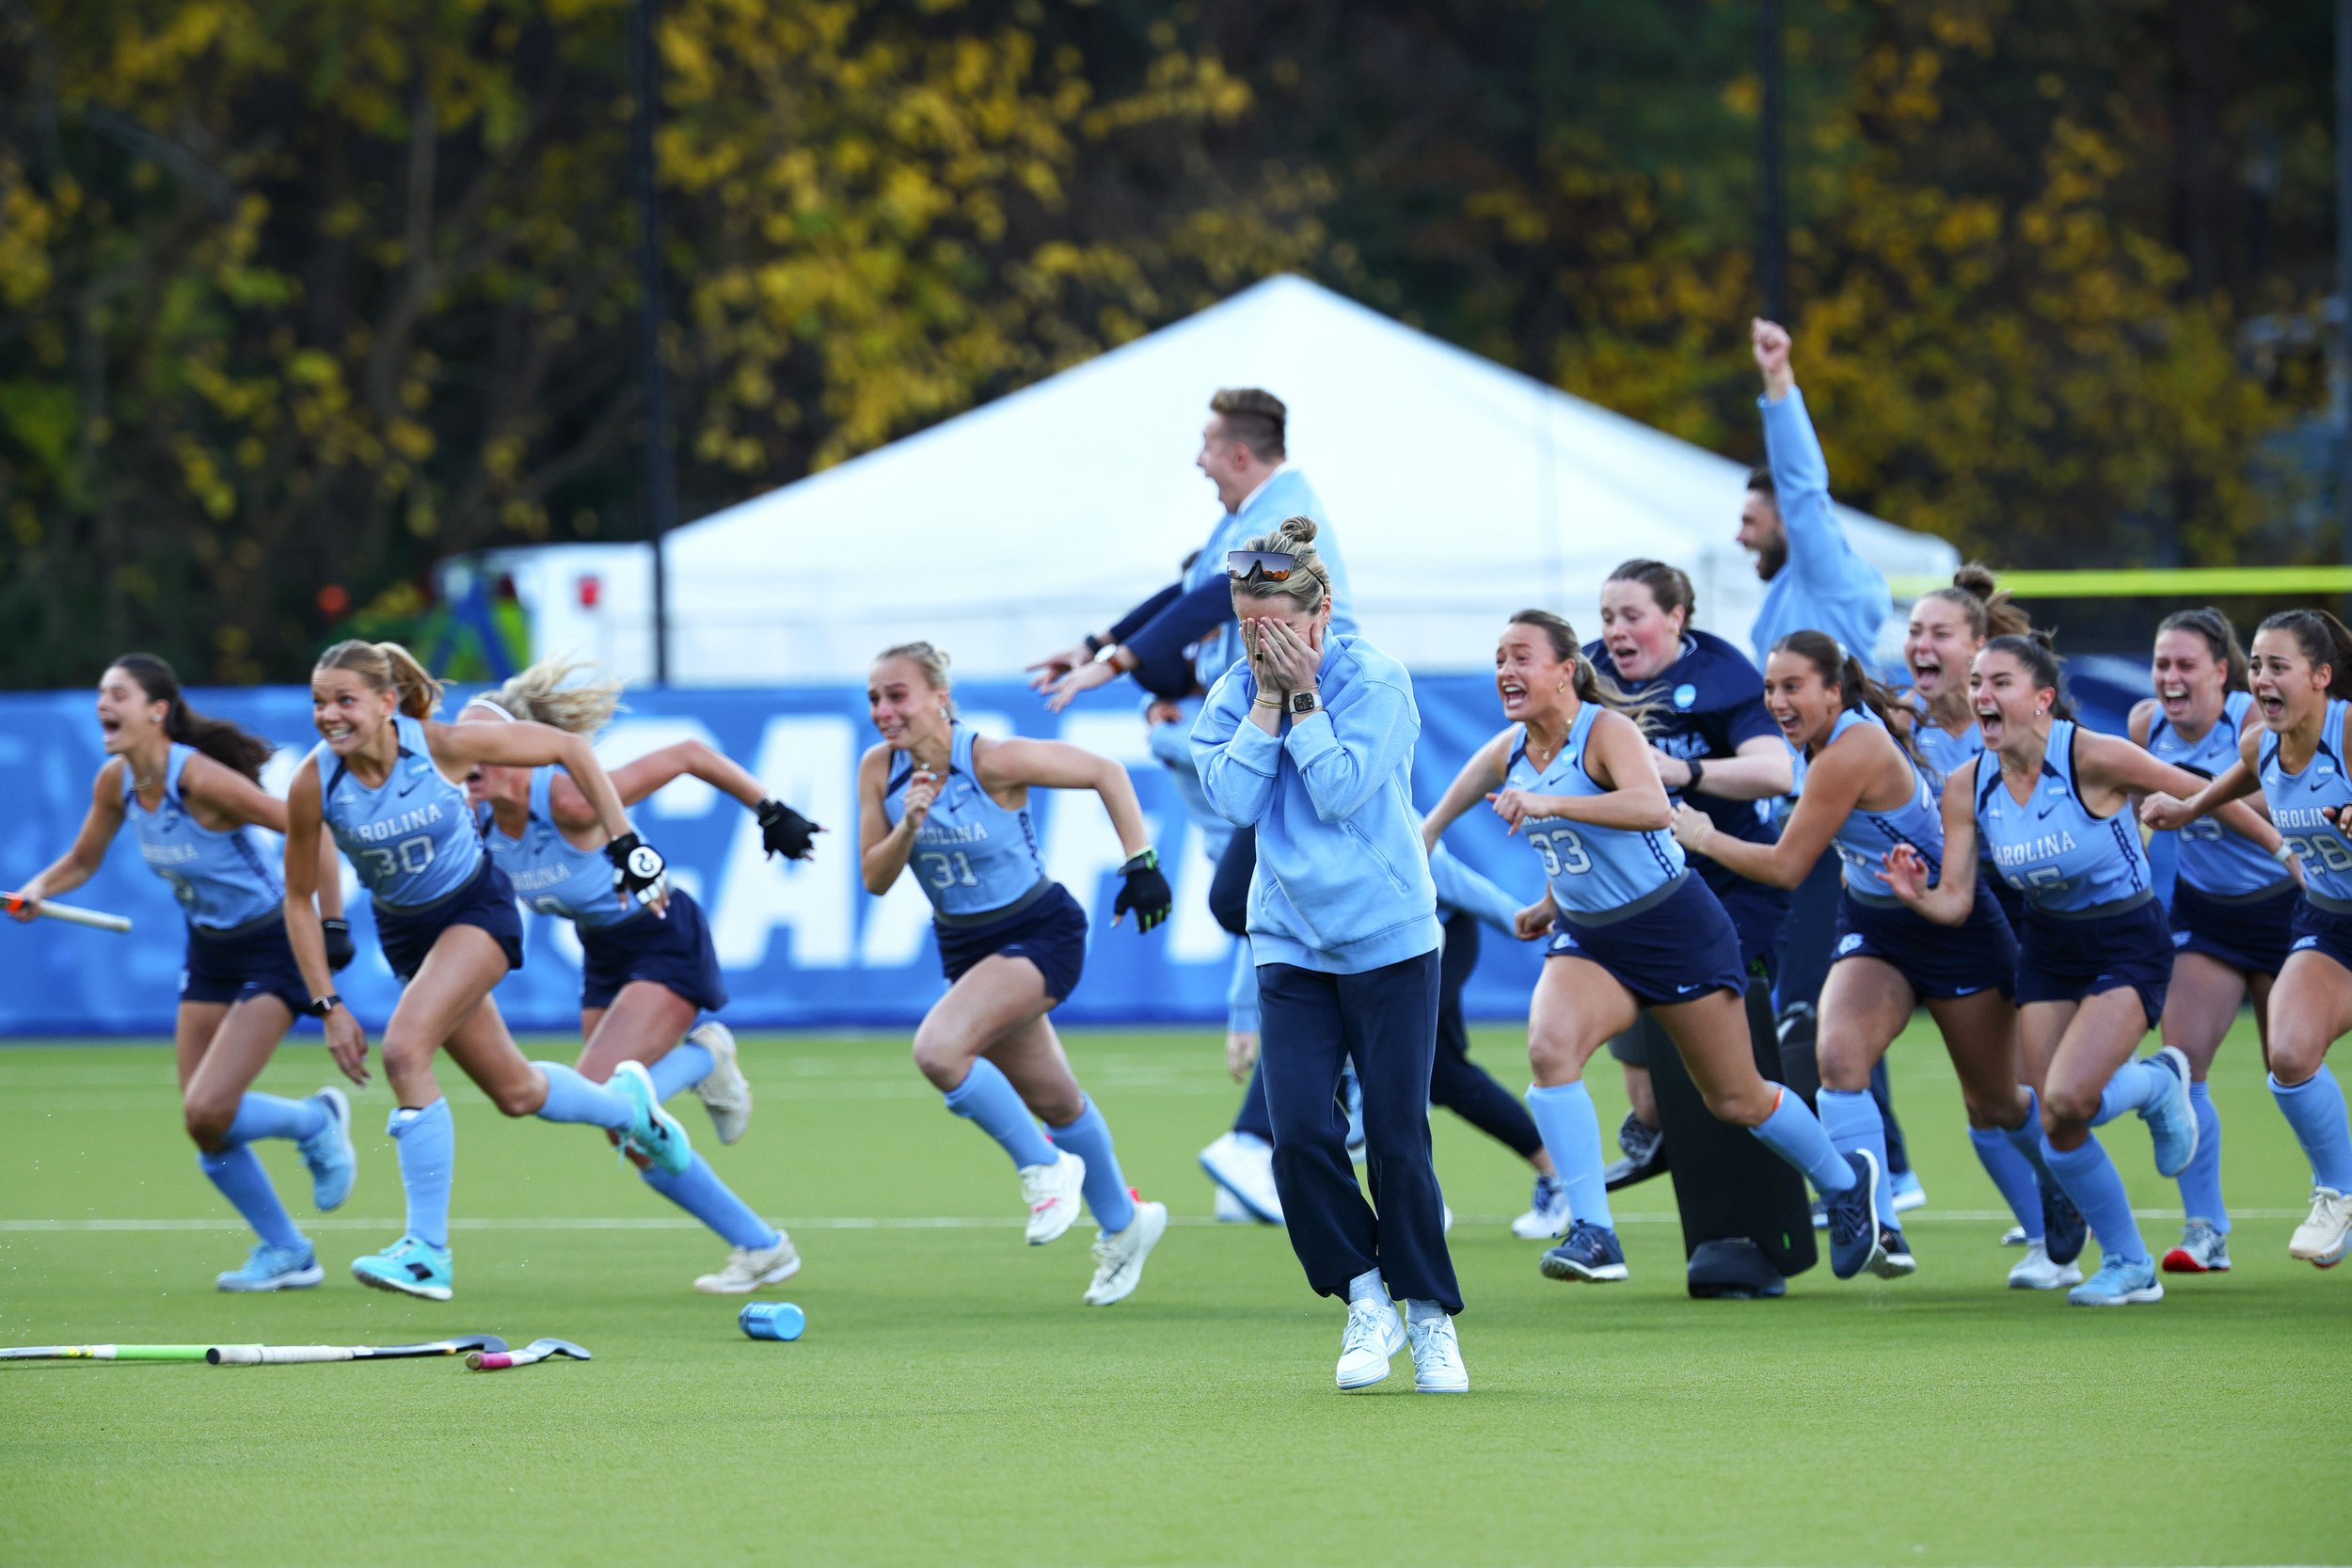  CHAPEL HILL, NORTH CAROLINA - NOVEMBER 19: Head Coach Erin Matson of the North Carolina Tar Heels can’t look after defeating the Northwestern Wildcats for the national title during the Division I Women’s Field Hockey Championship held at Karen Shelt